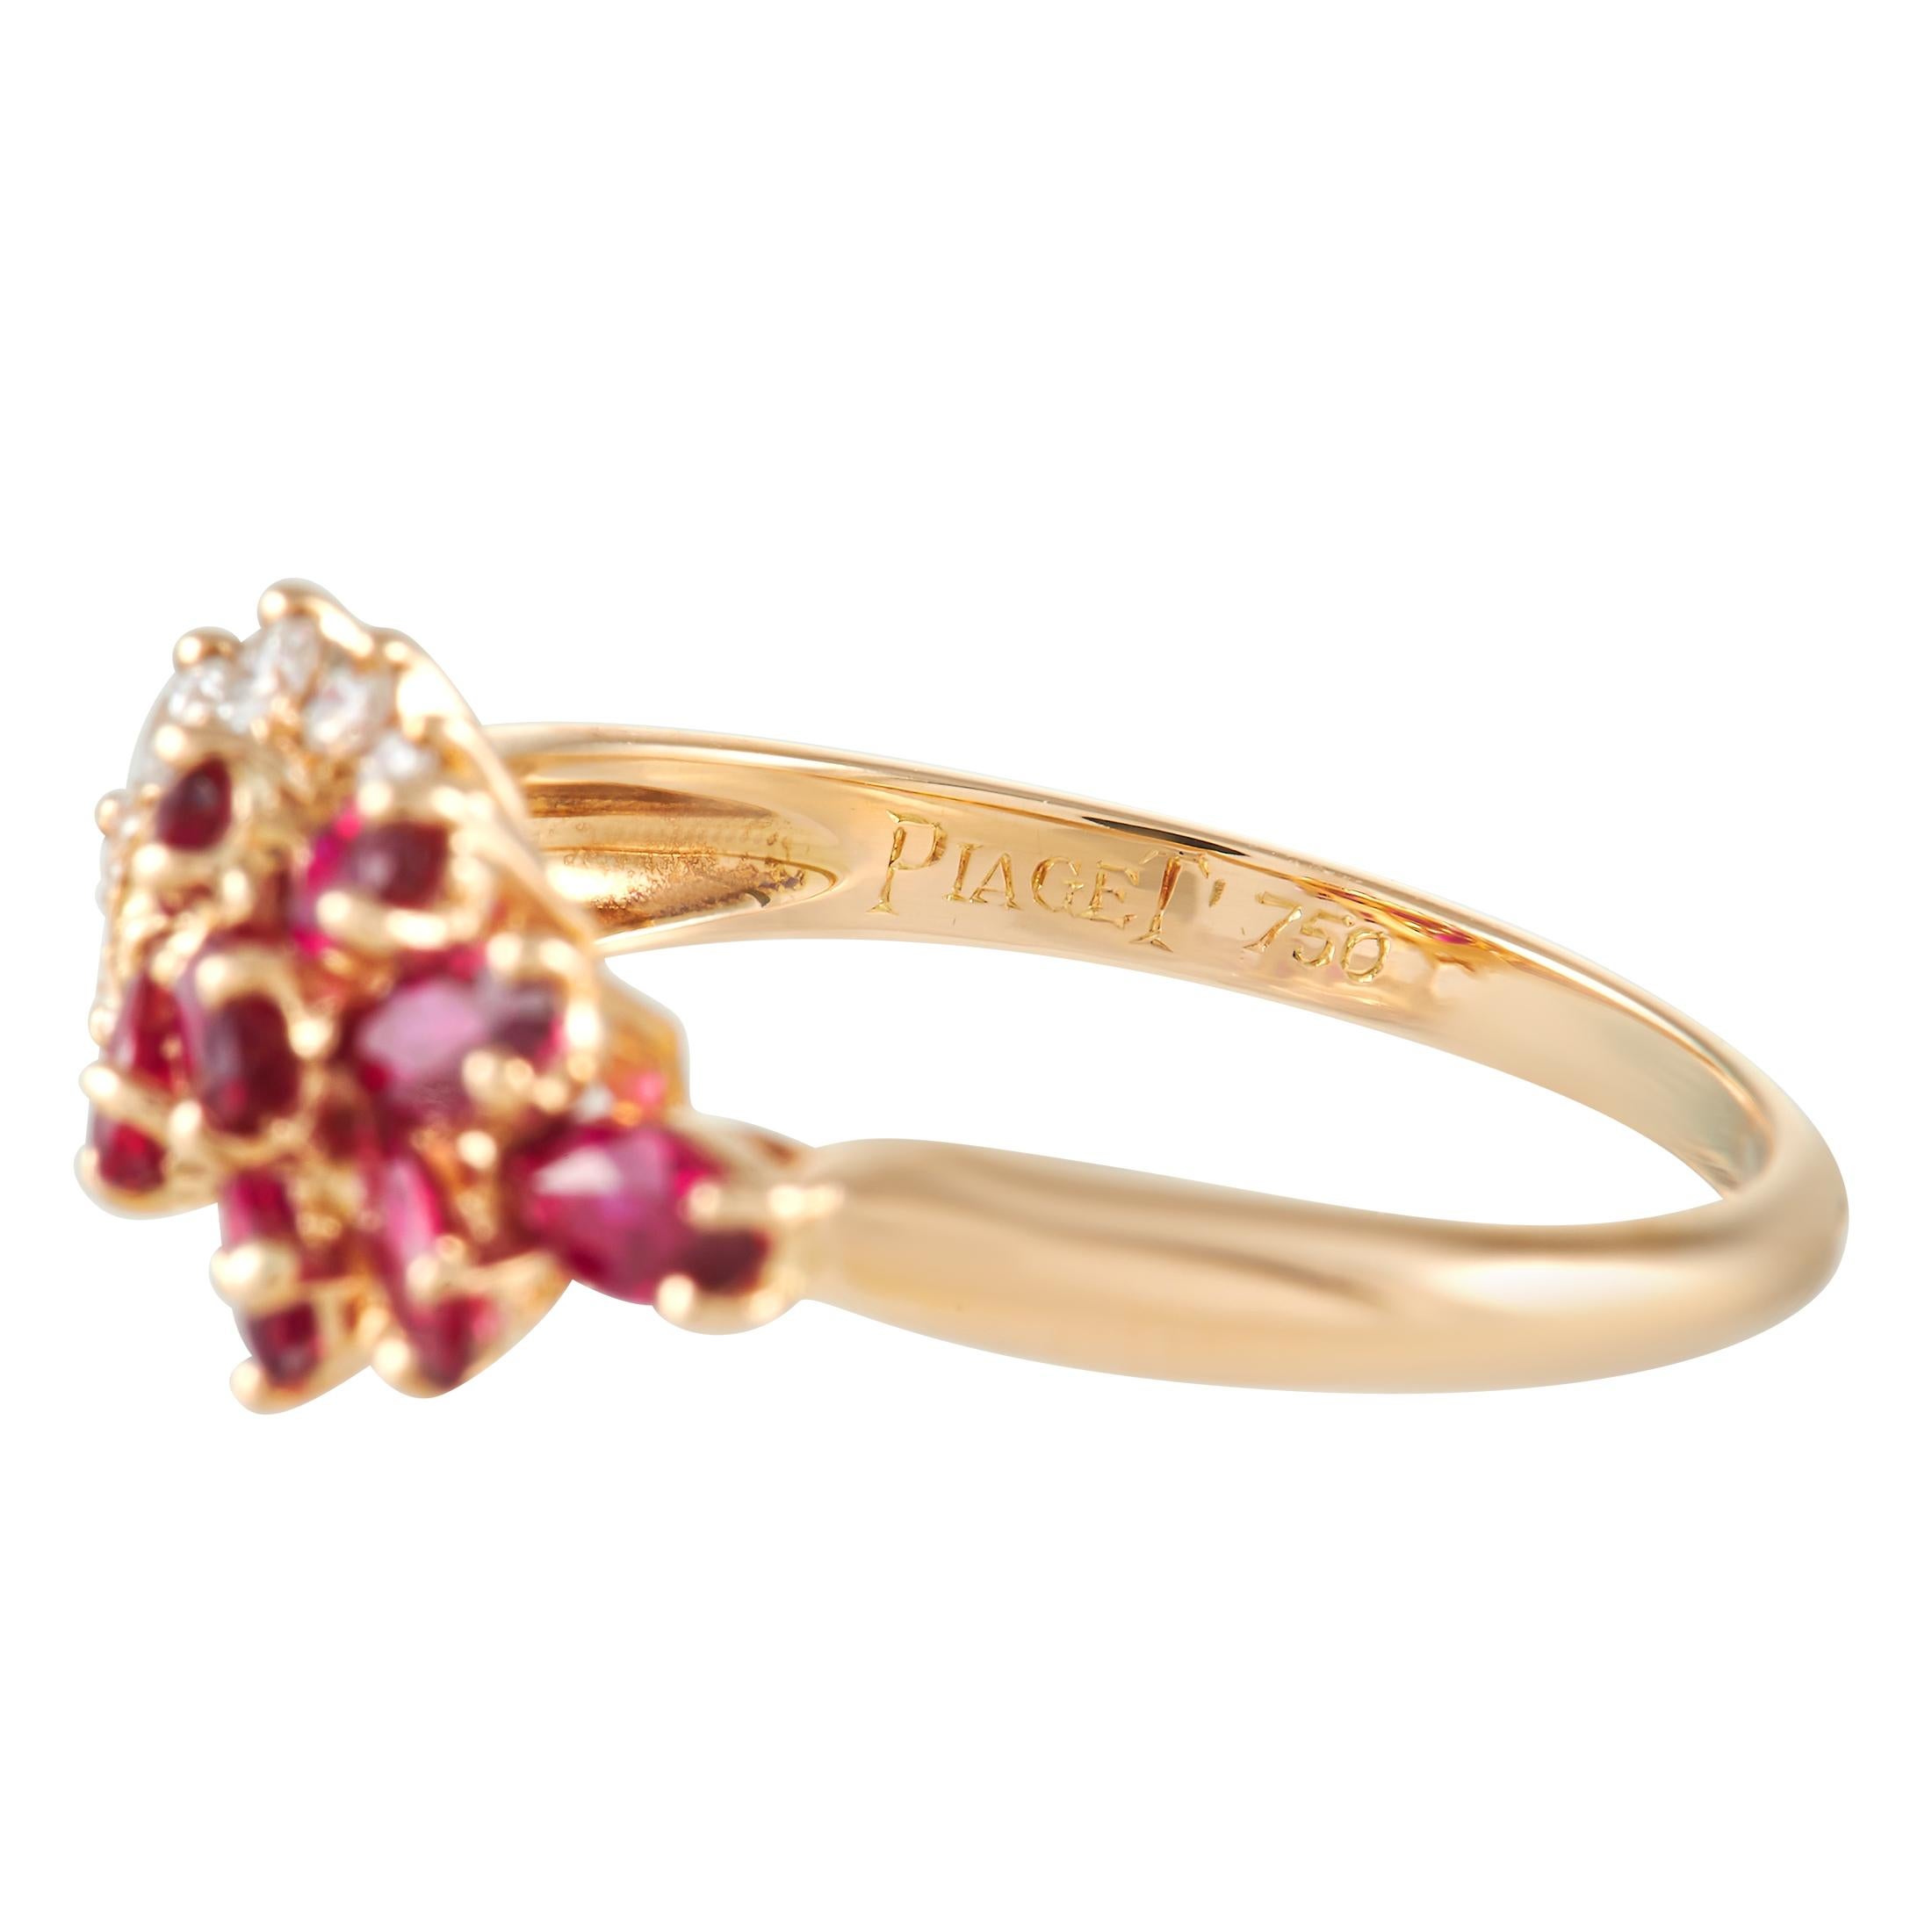 Round Cut Piaget 18K Yellow Gold Diamond and Ruby Ring